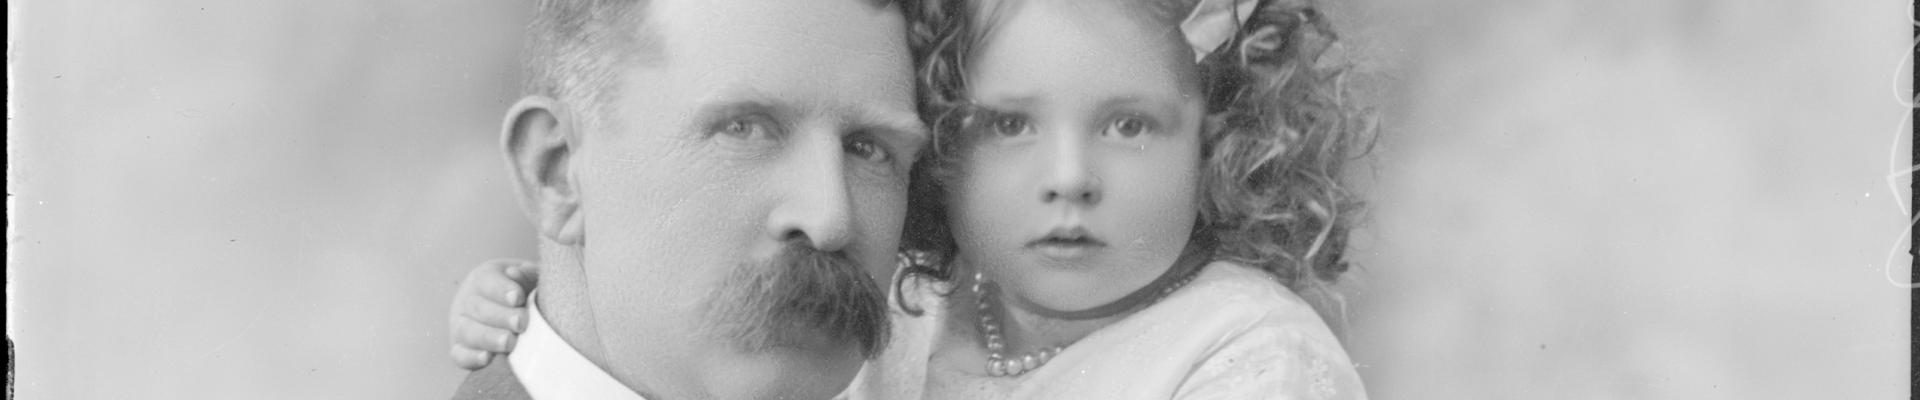 151432PDWilliam Henry Gumbleton and daughter possibly Shiela c1914